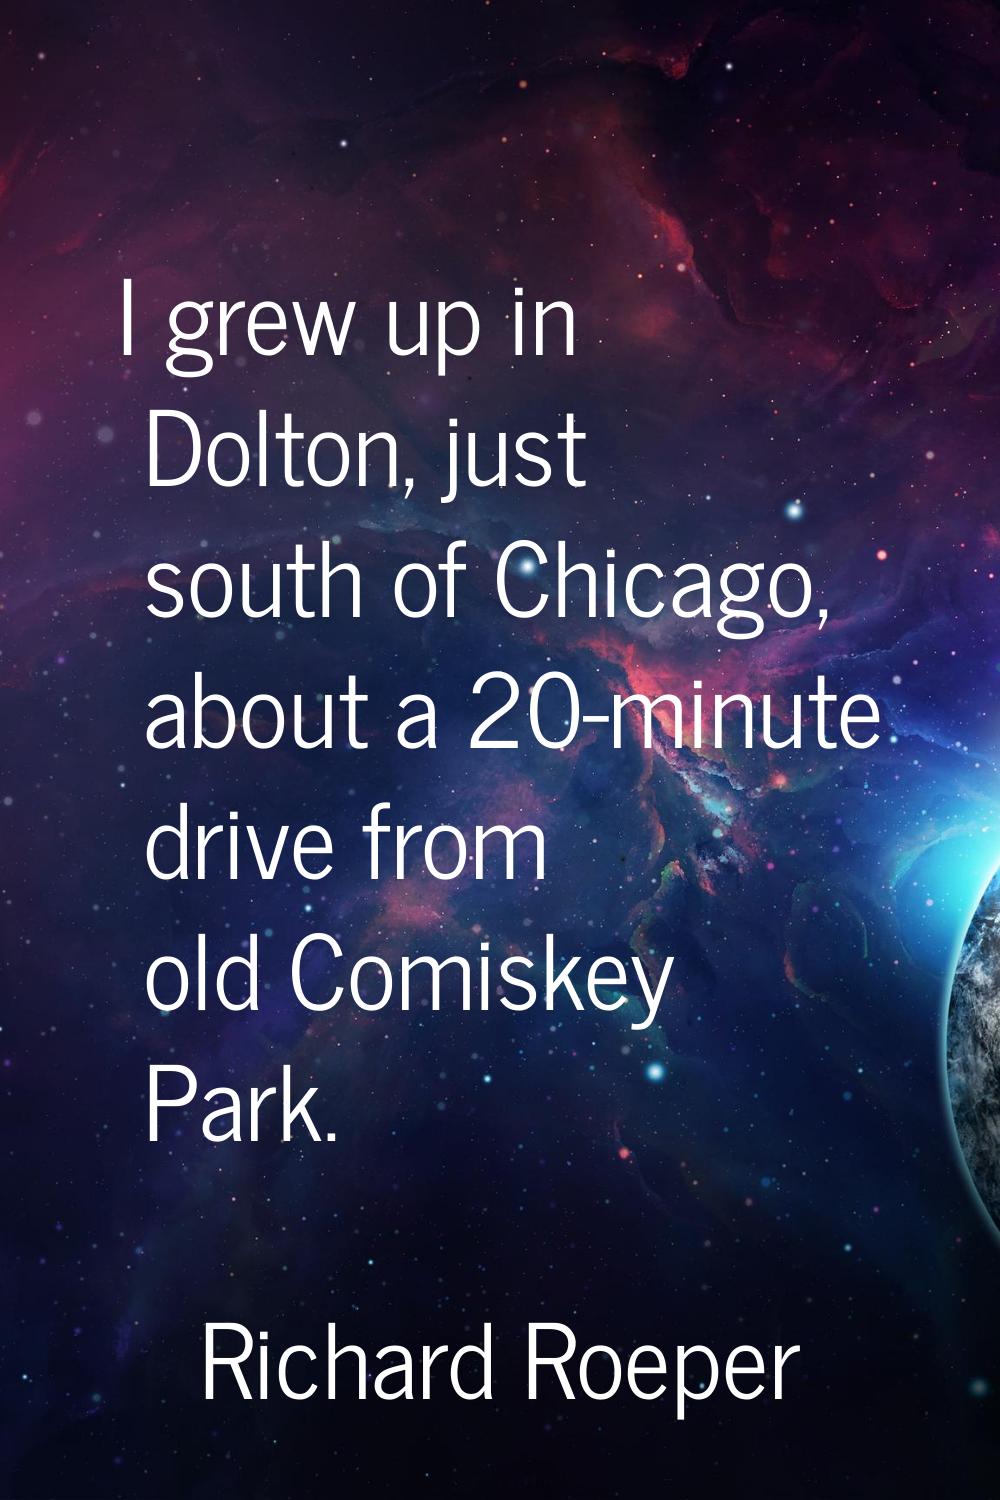 I grew up in Dolton, just south of Chicago, about a 20-minute drive from old Comiskey Park.